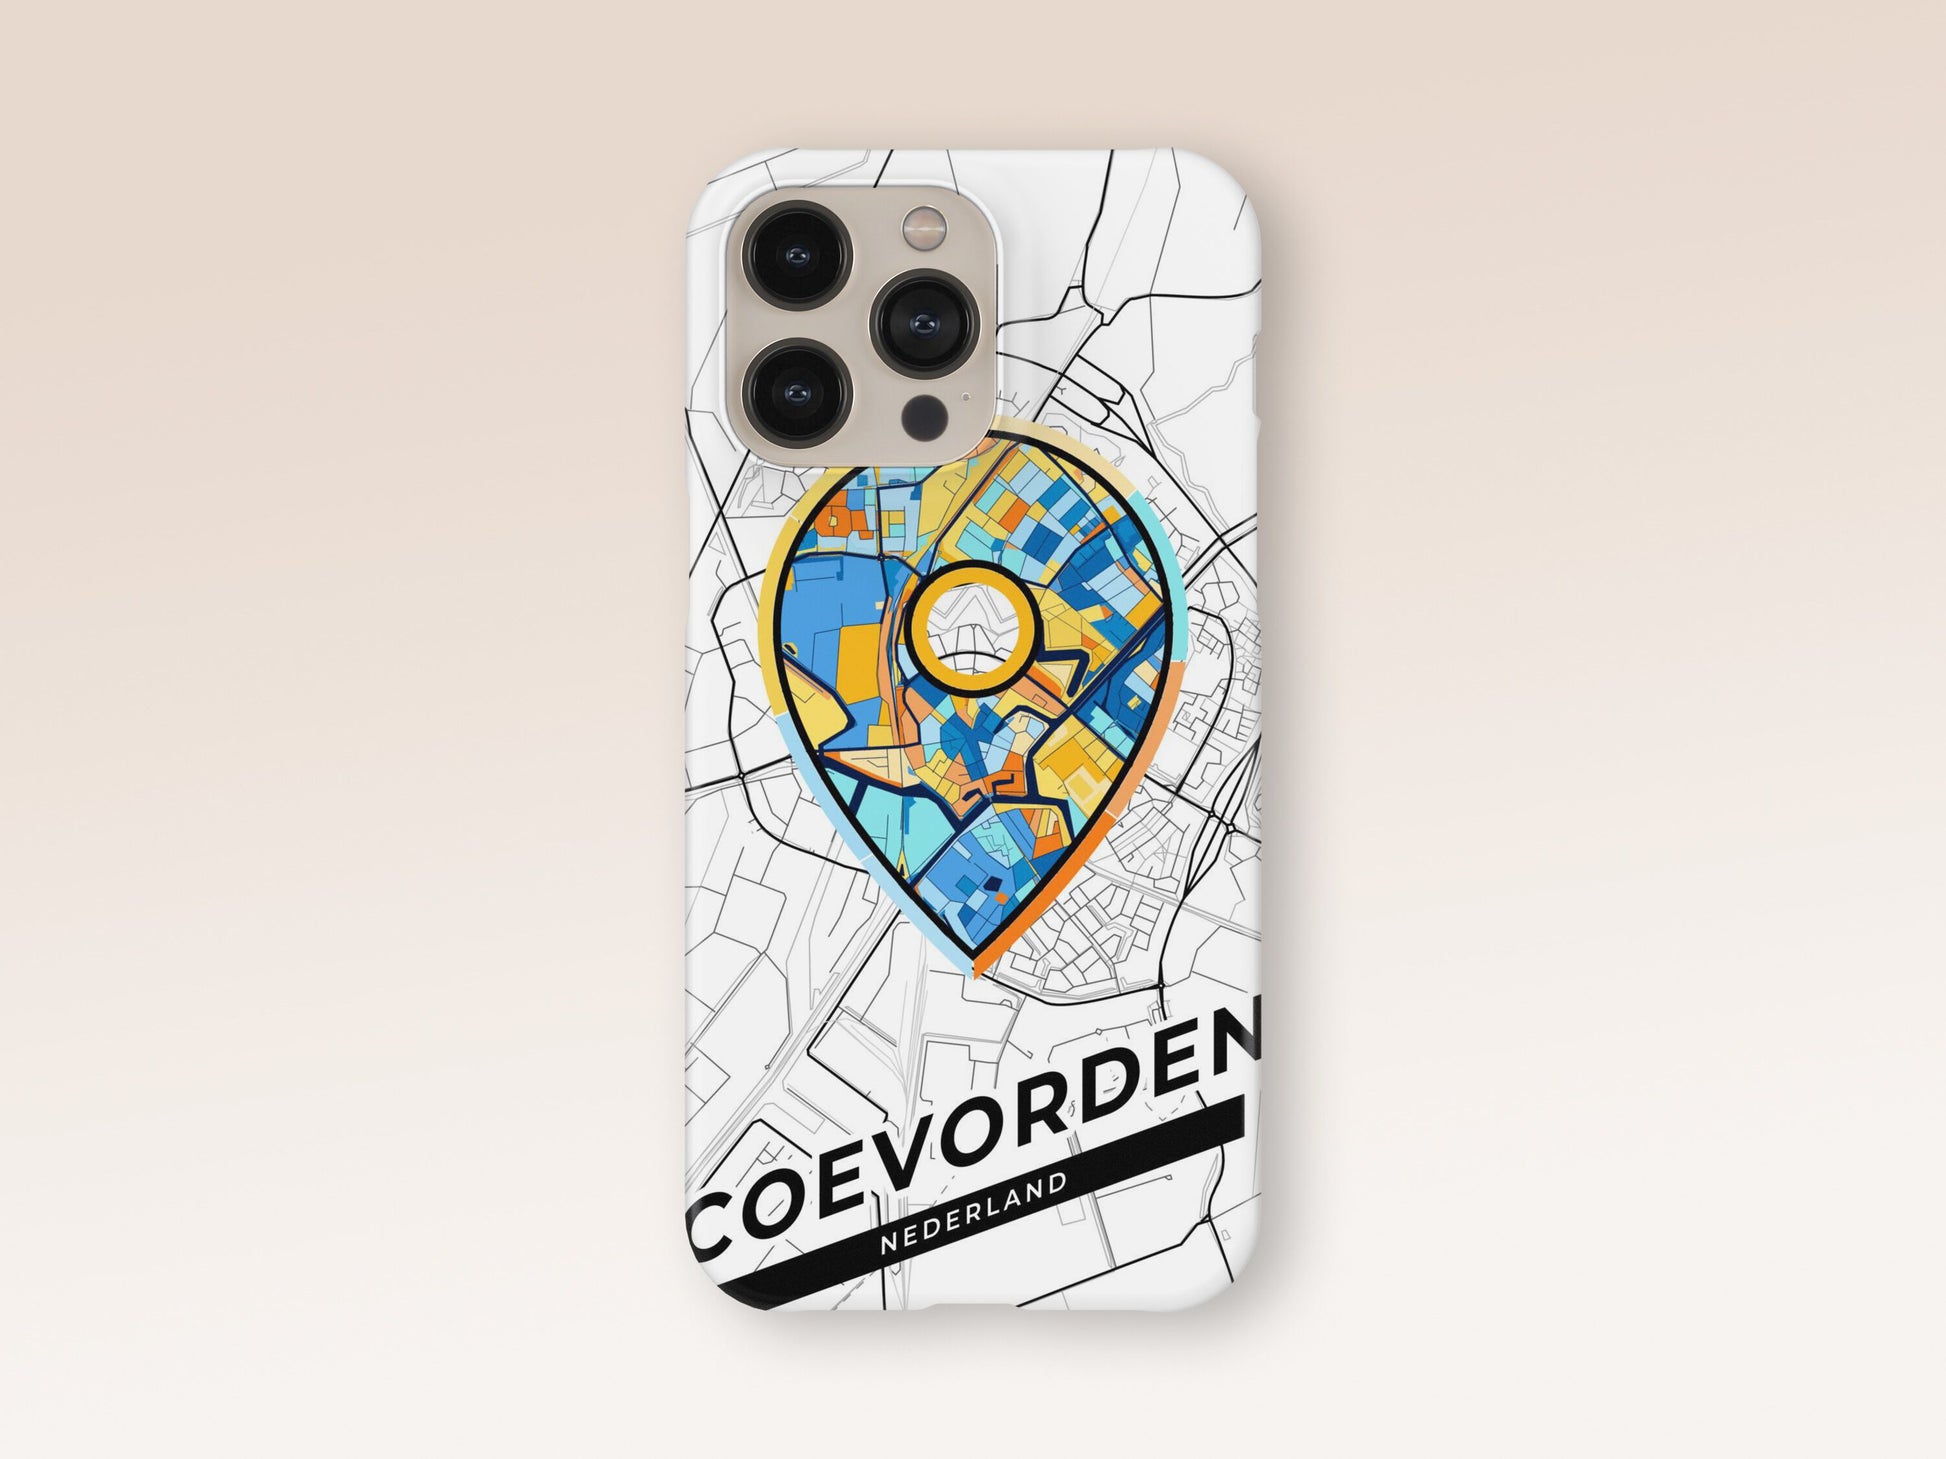 Coevorden Netherlands slim phone case with colorful icon. Birthday, wedding or housewarming gift. Couple match cases. 1